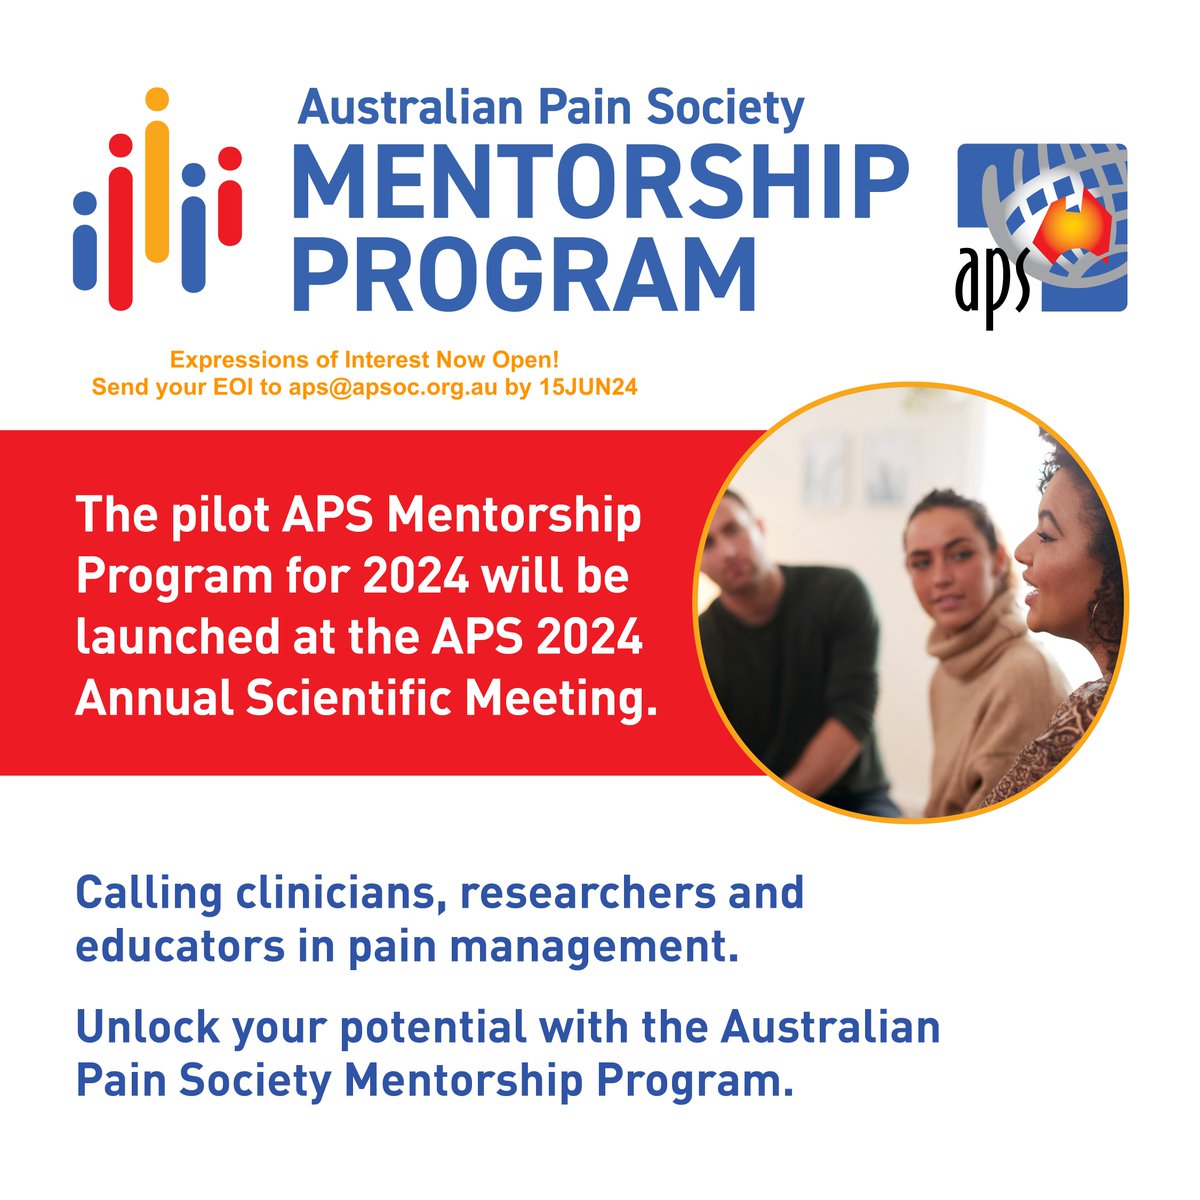 #AusPainSoc members: Send your Expression of Interest by email to aps@apsoc.org.au by 15JUN24